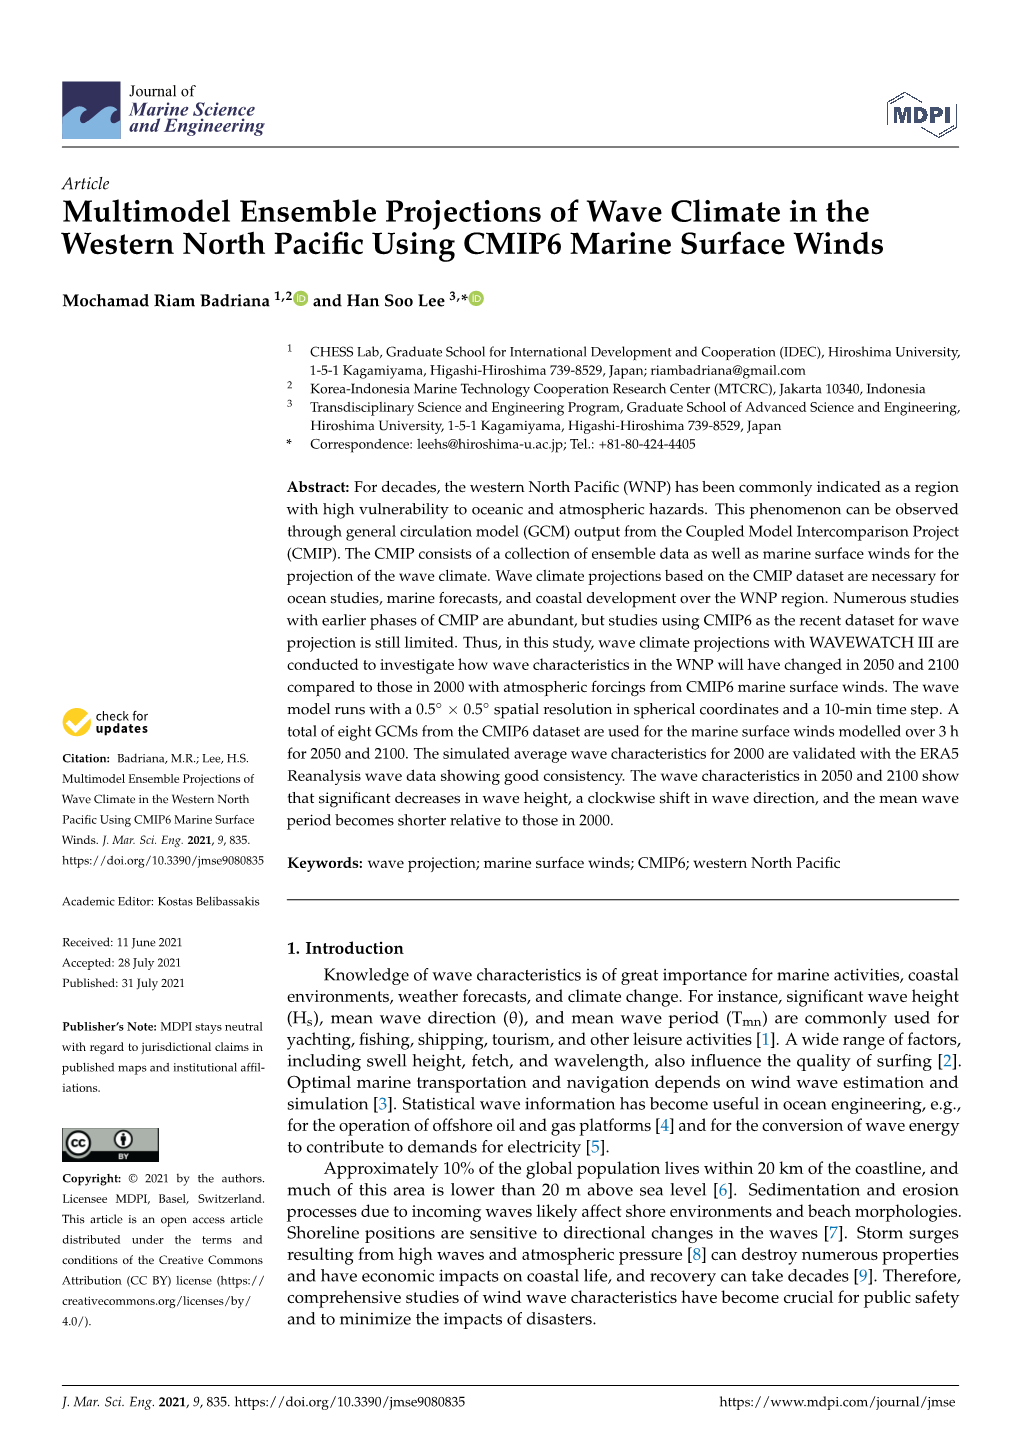 Multimodel Ensemble Projections of Wave Climate in the Western North Pacific Using CMIP6 Marine Surface Winds